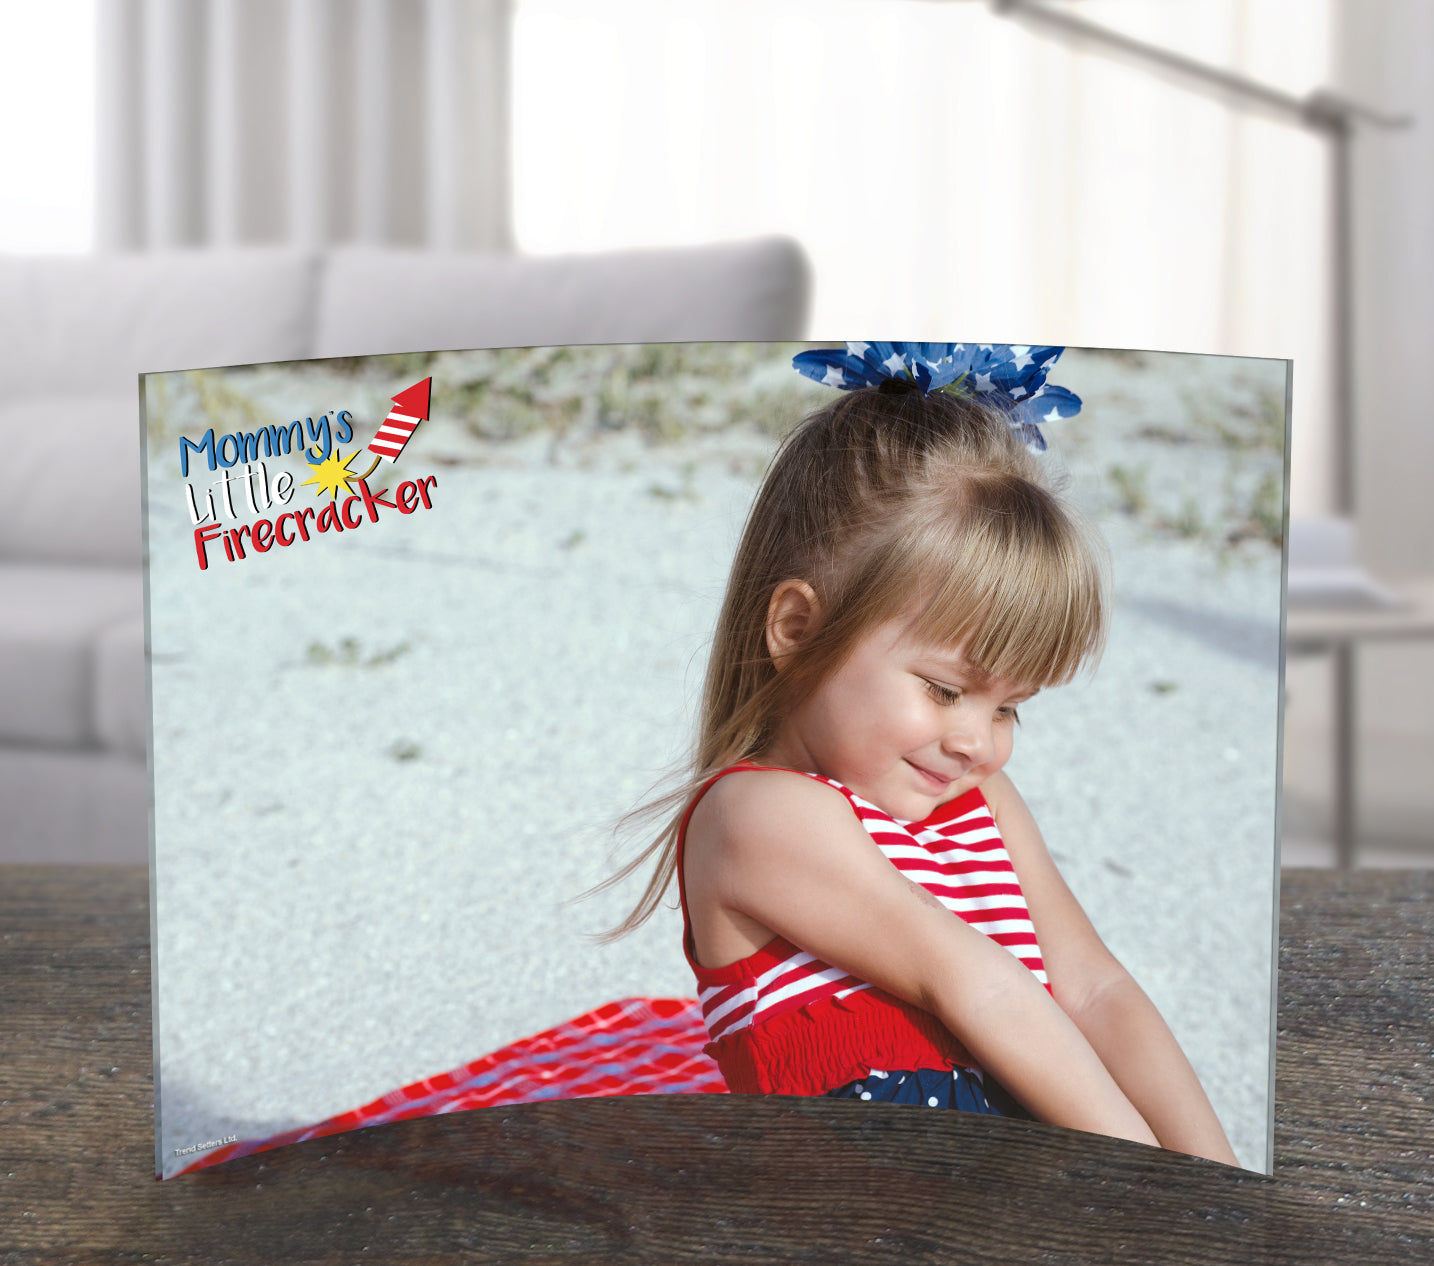 Patriotic Collection (Mommy's Little Firecracker - Personalized)  7" x 5" Curved Acrylic Print